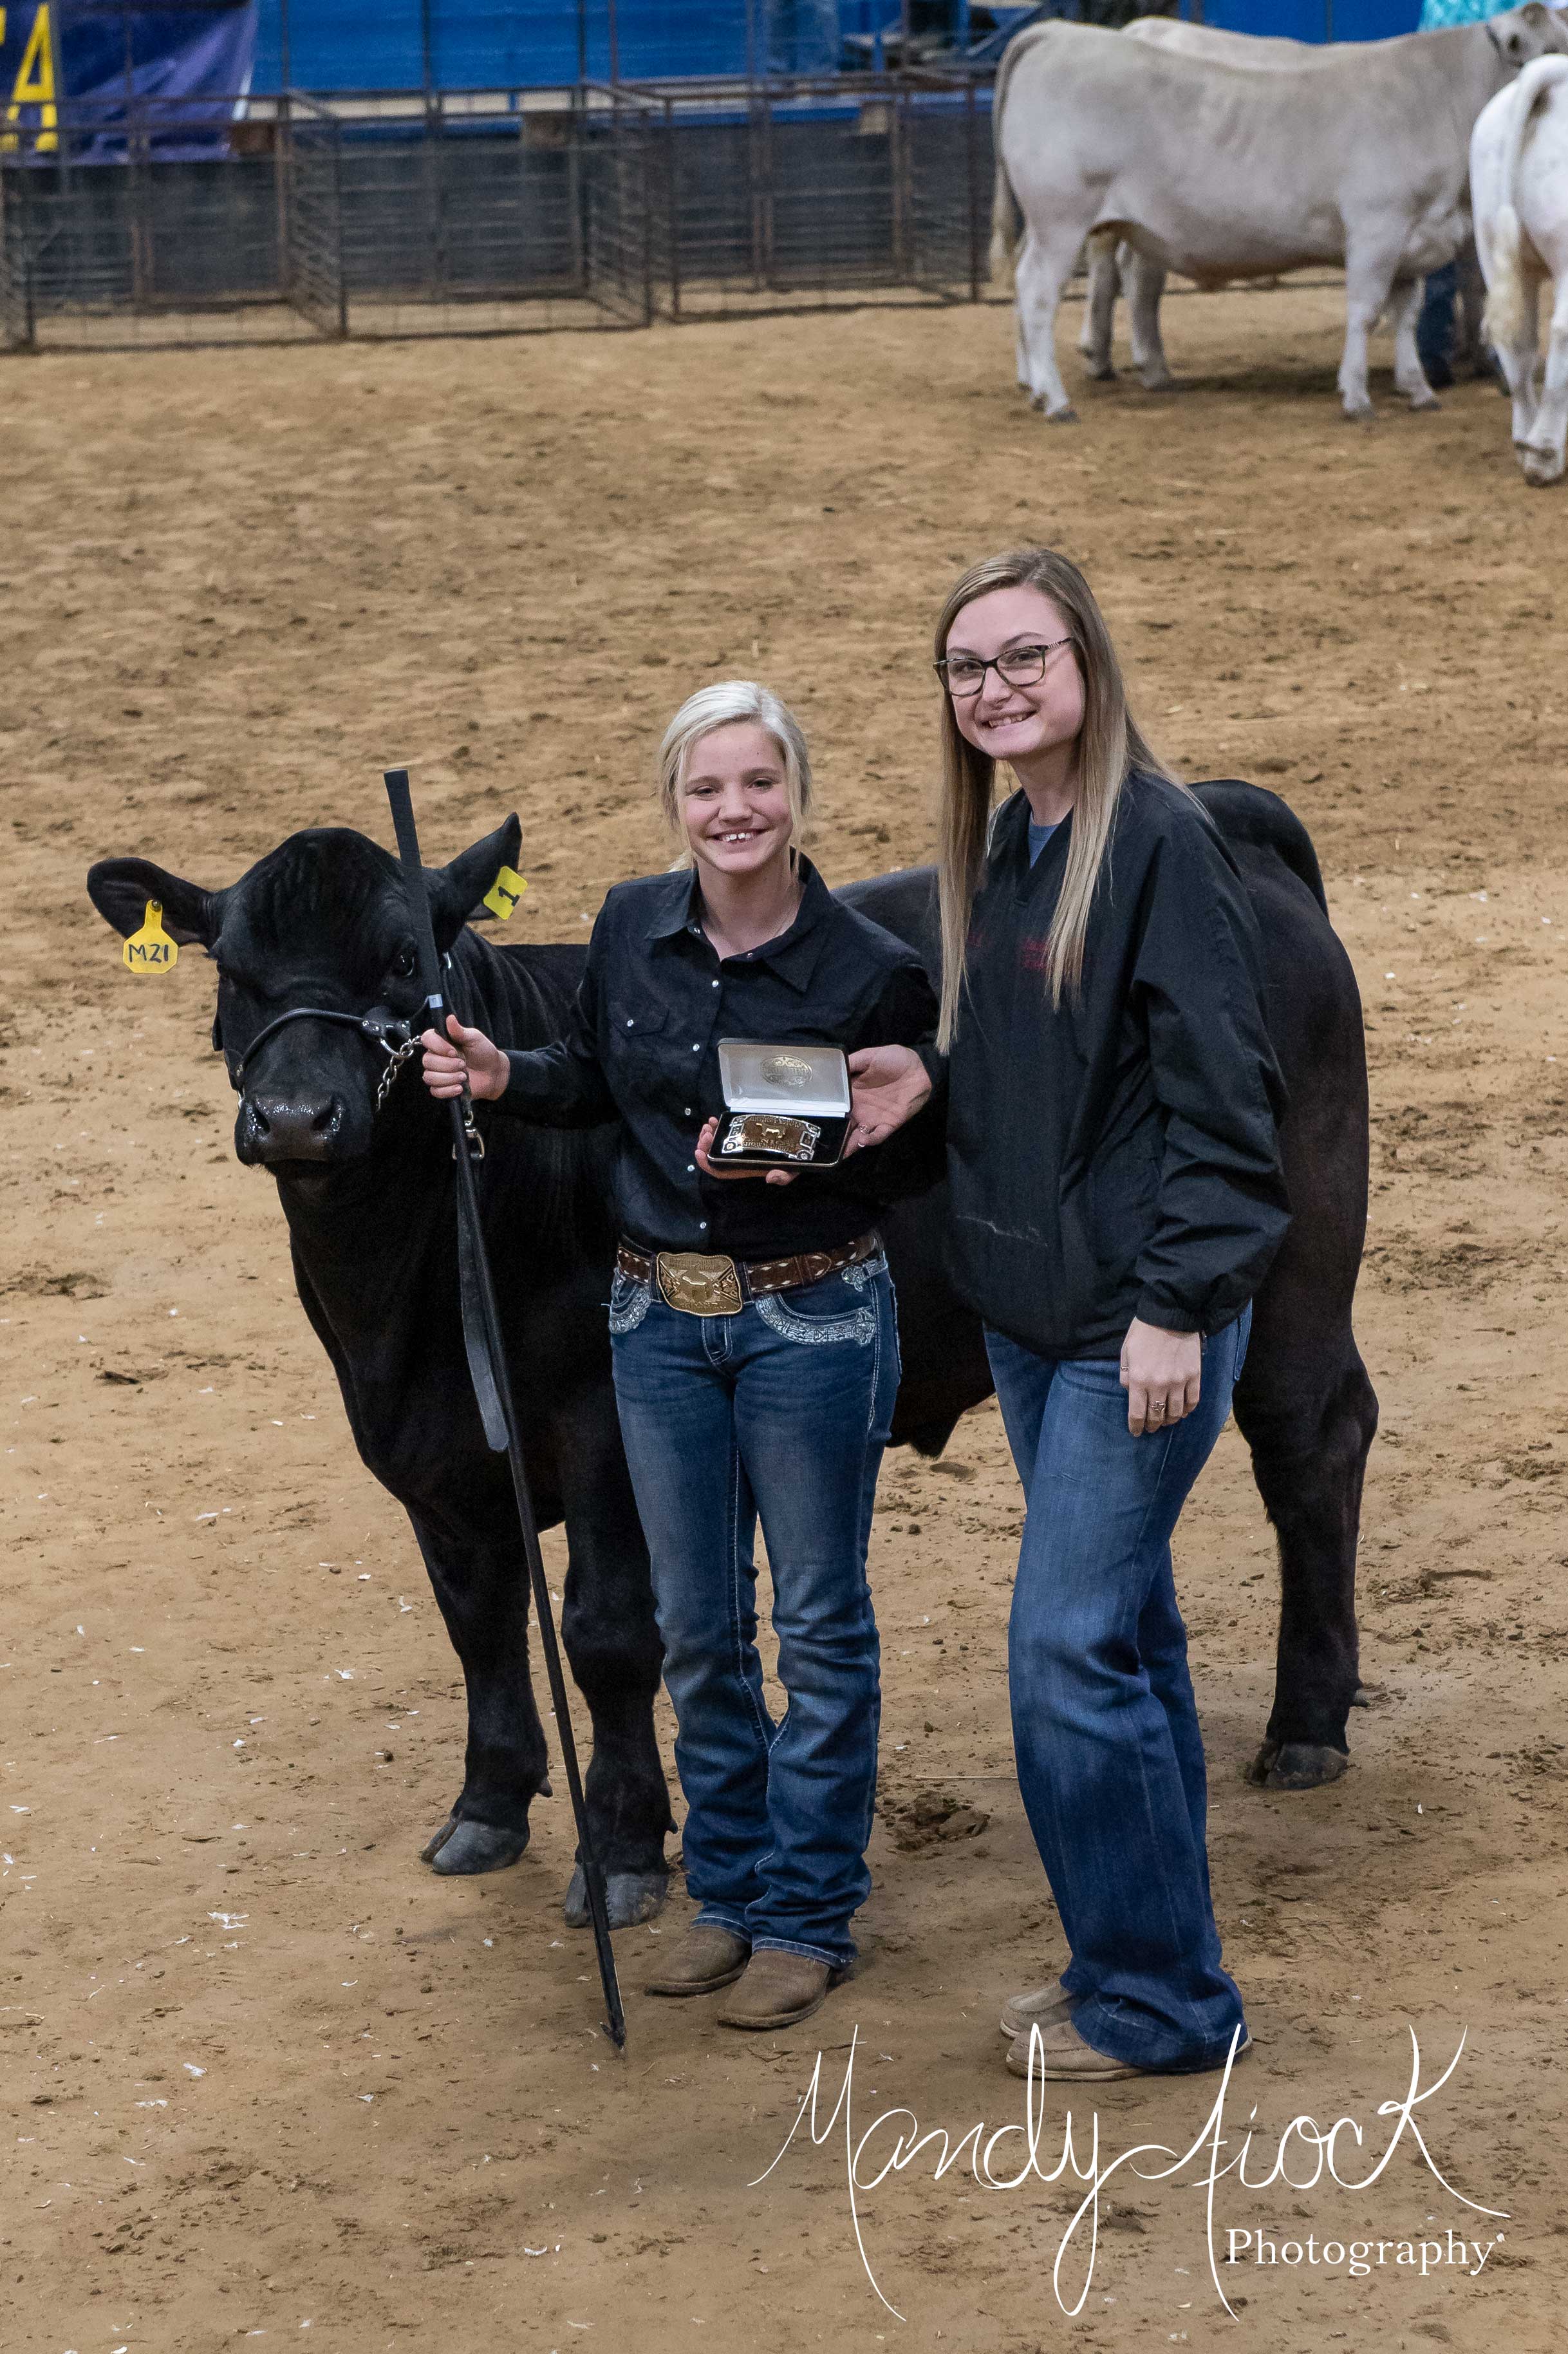 Sale Order for 2019 Hopkins County Junior Market Livestock Show’s Sale of Champions